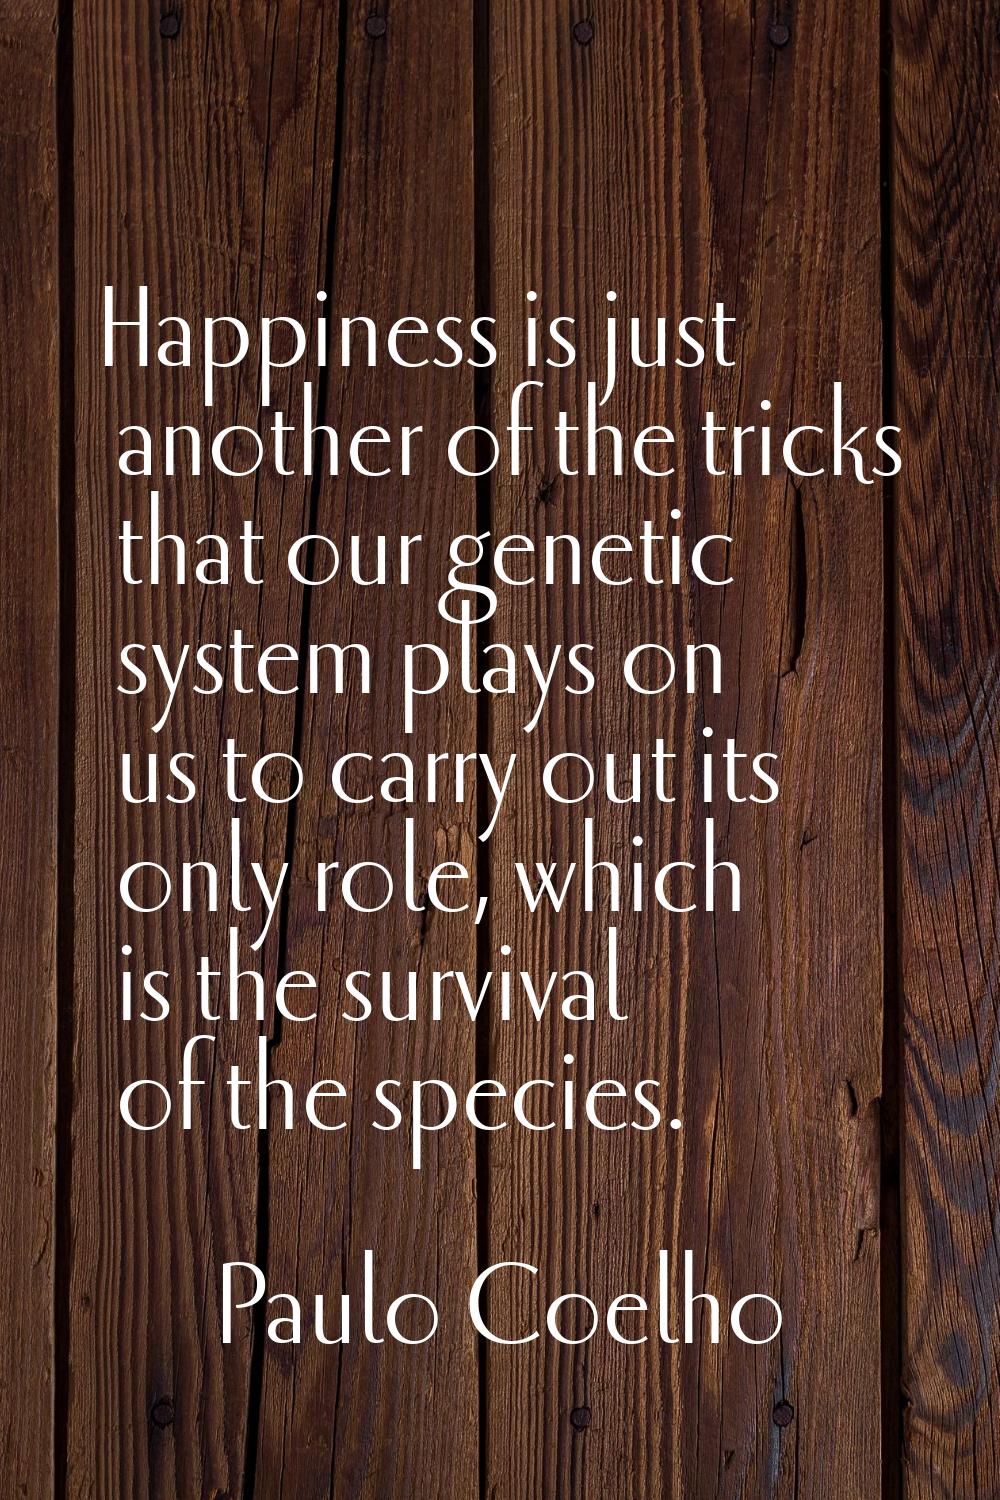 Happiness is just another of the tricks that our genetic system plays on us to carry out its only r